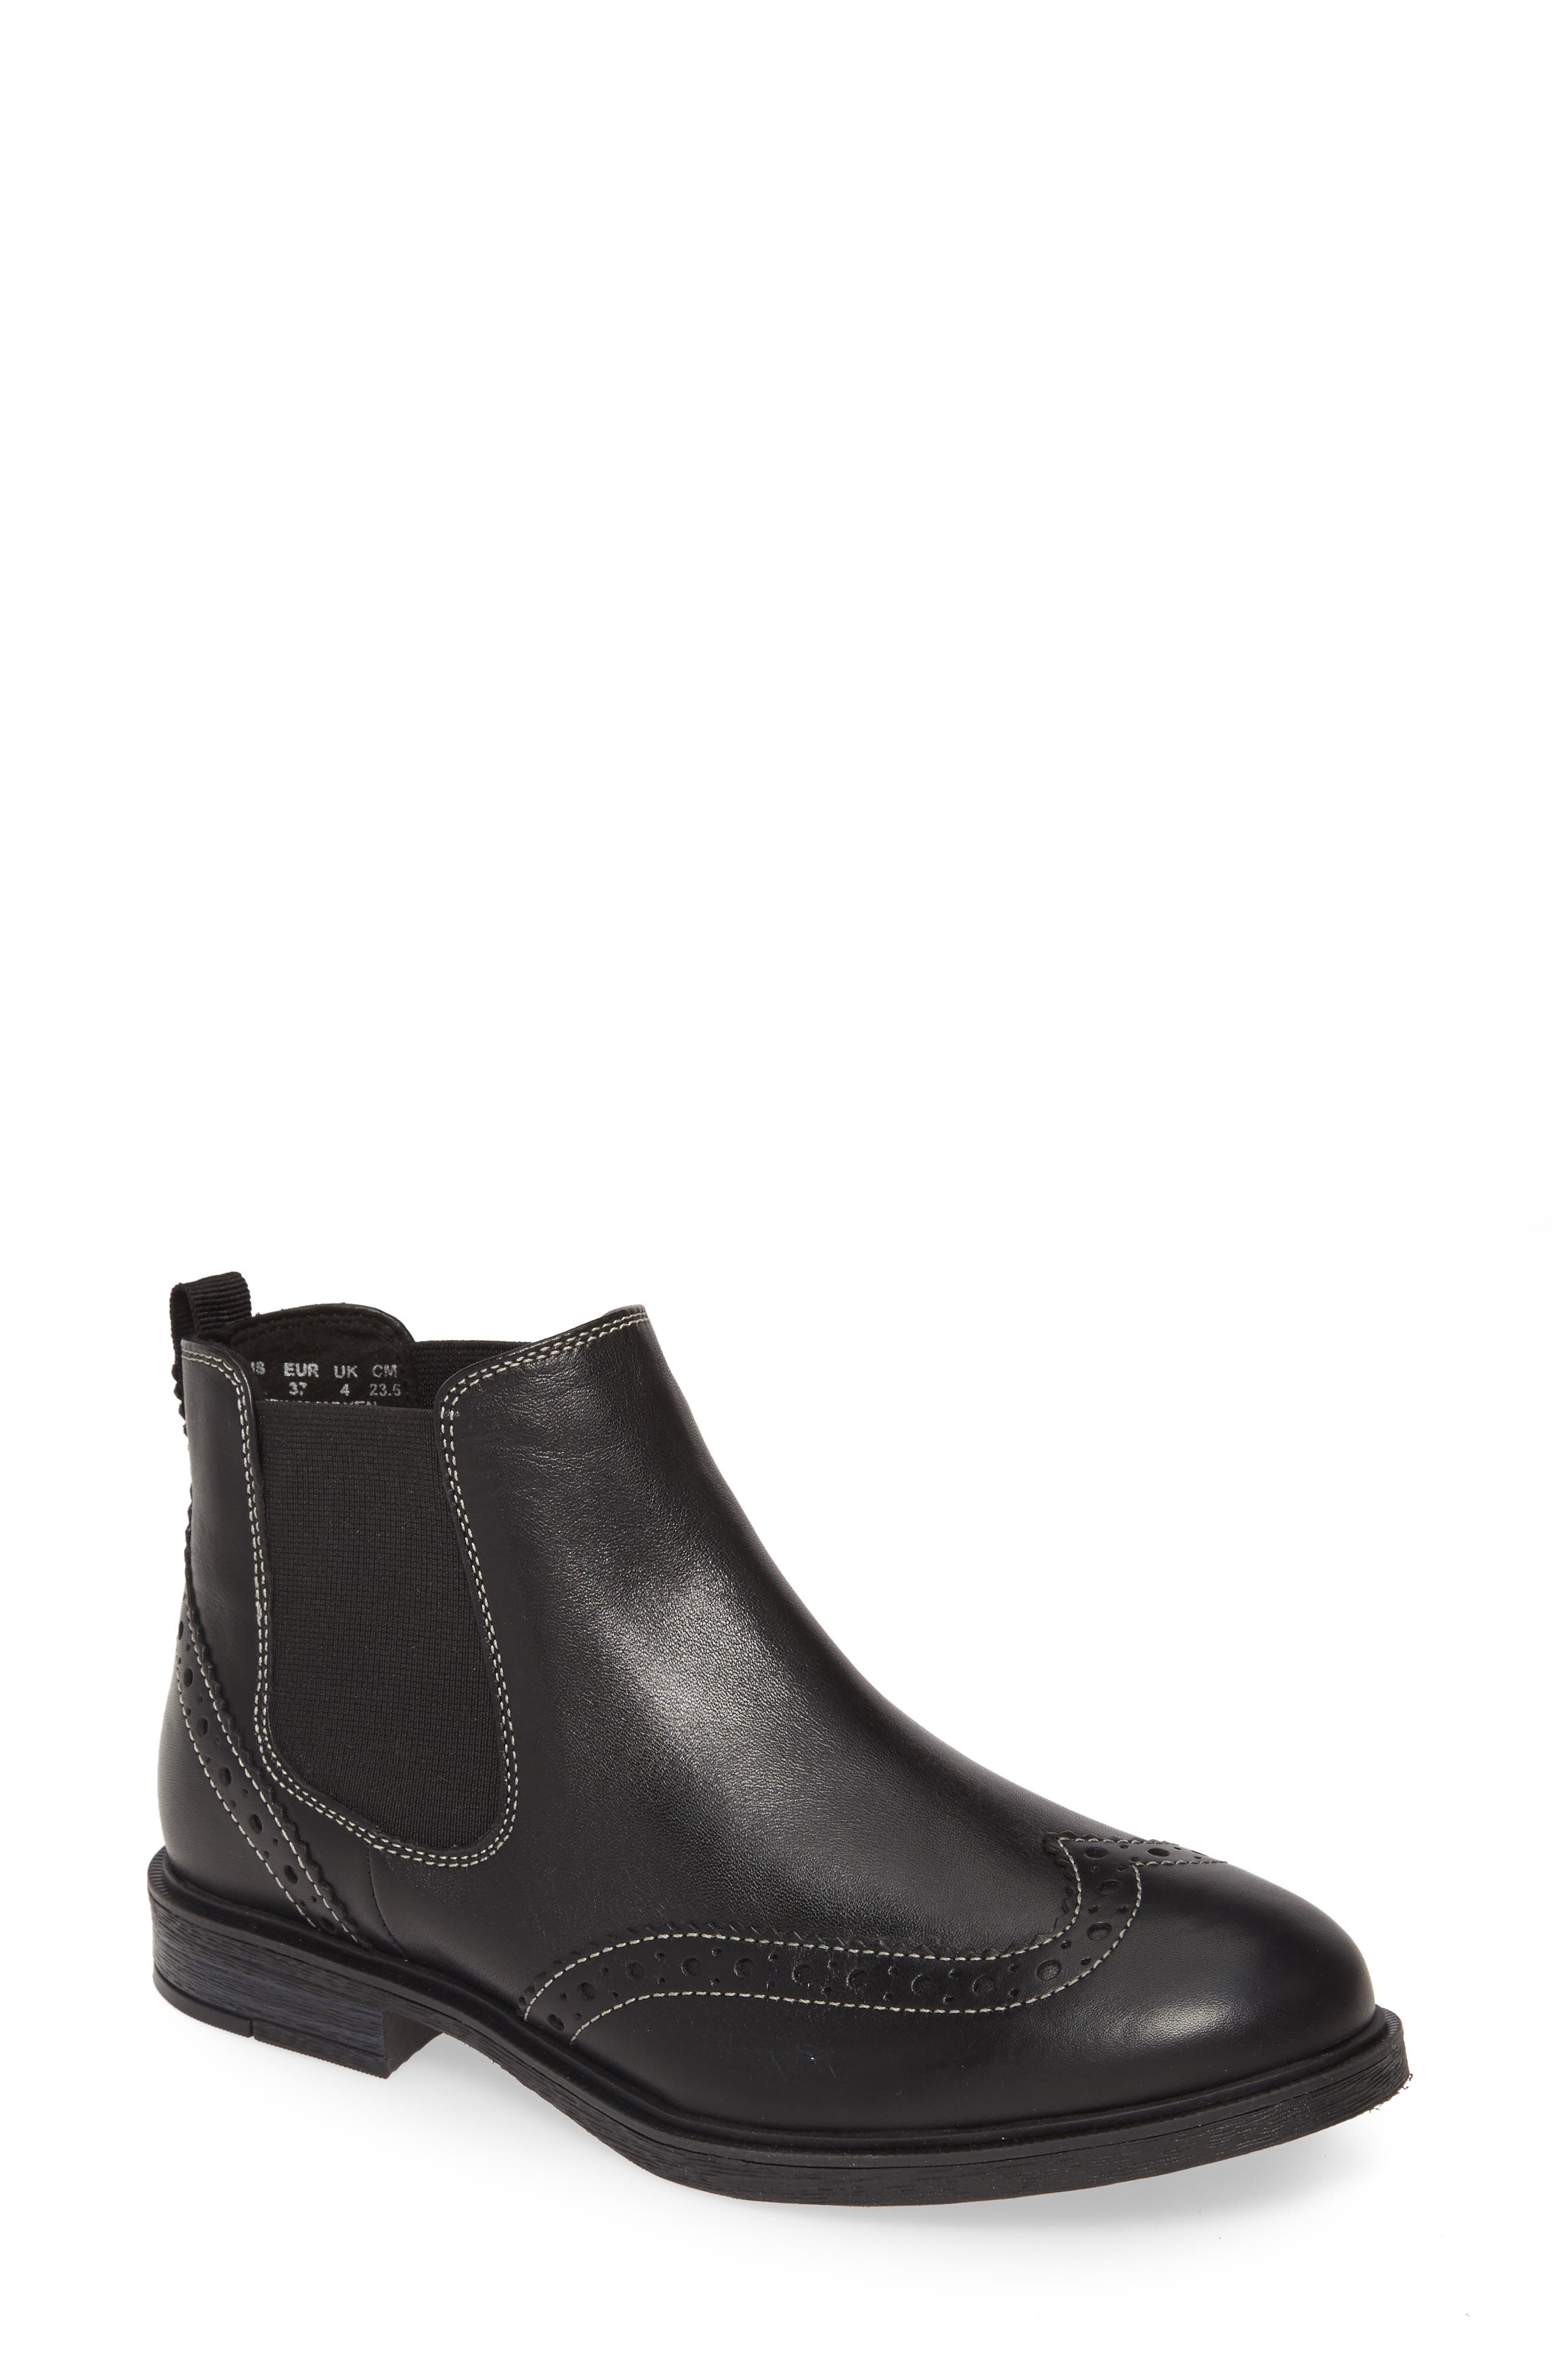 hush puppies chelsea boots womens